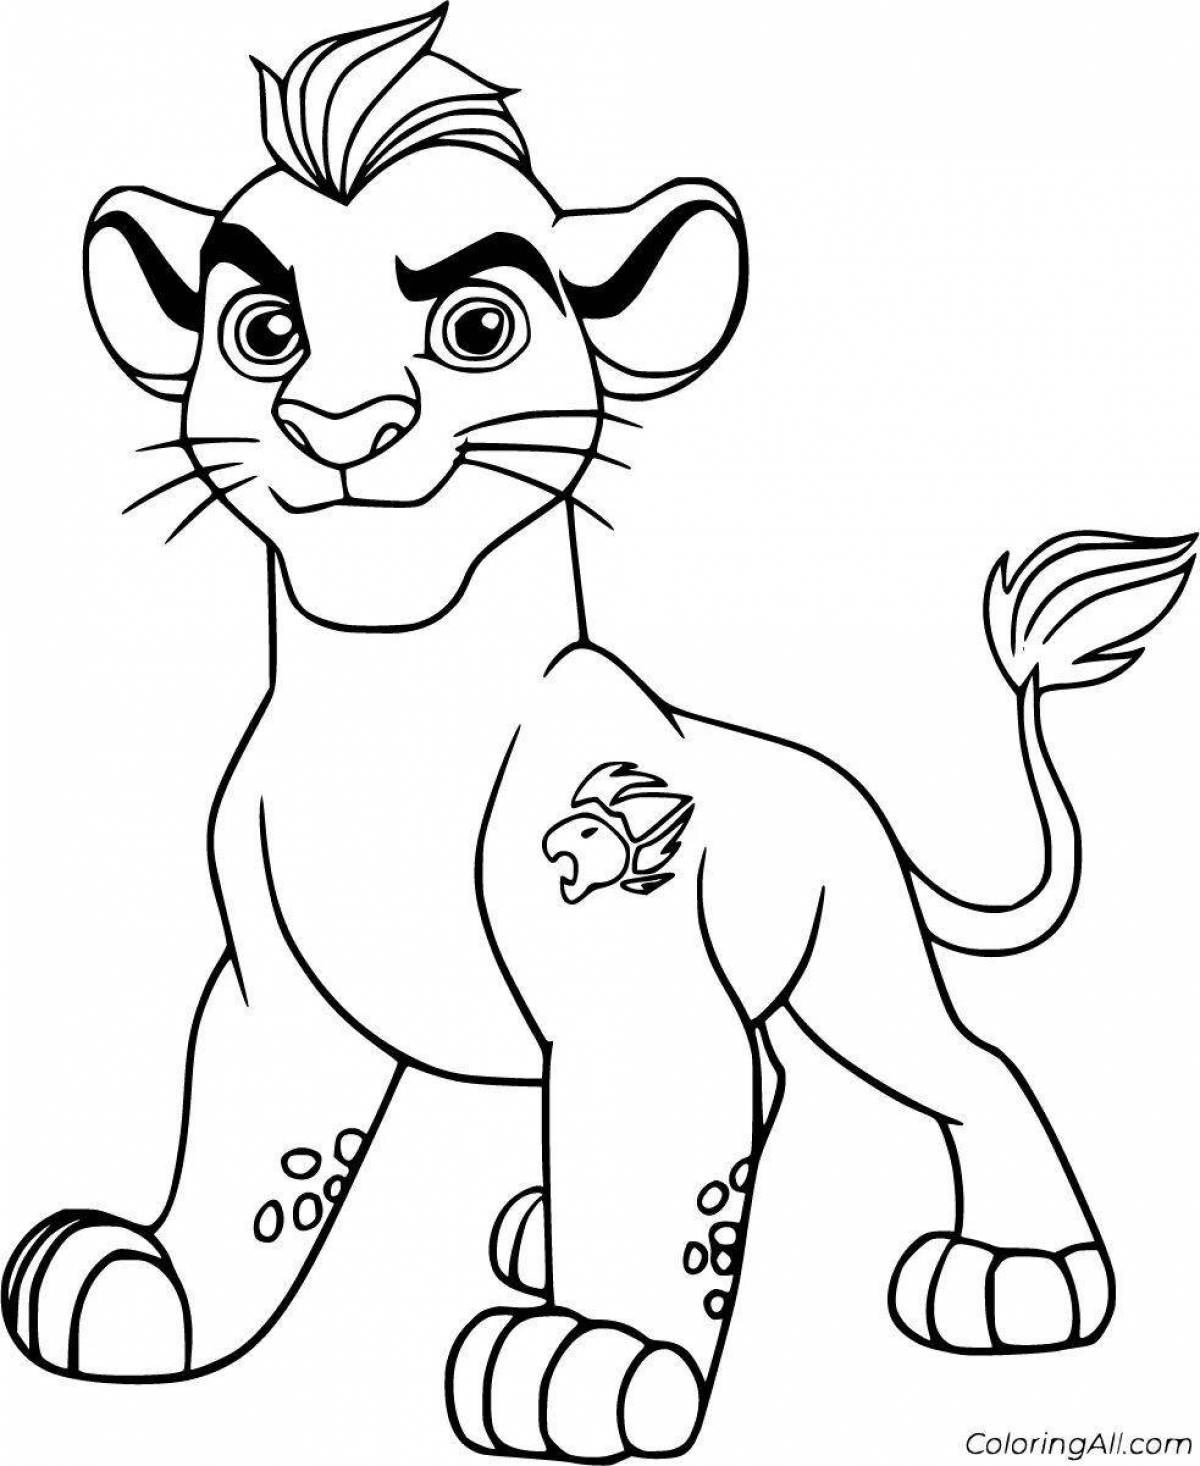 Rampant Lion King coloring pages for kids